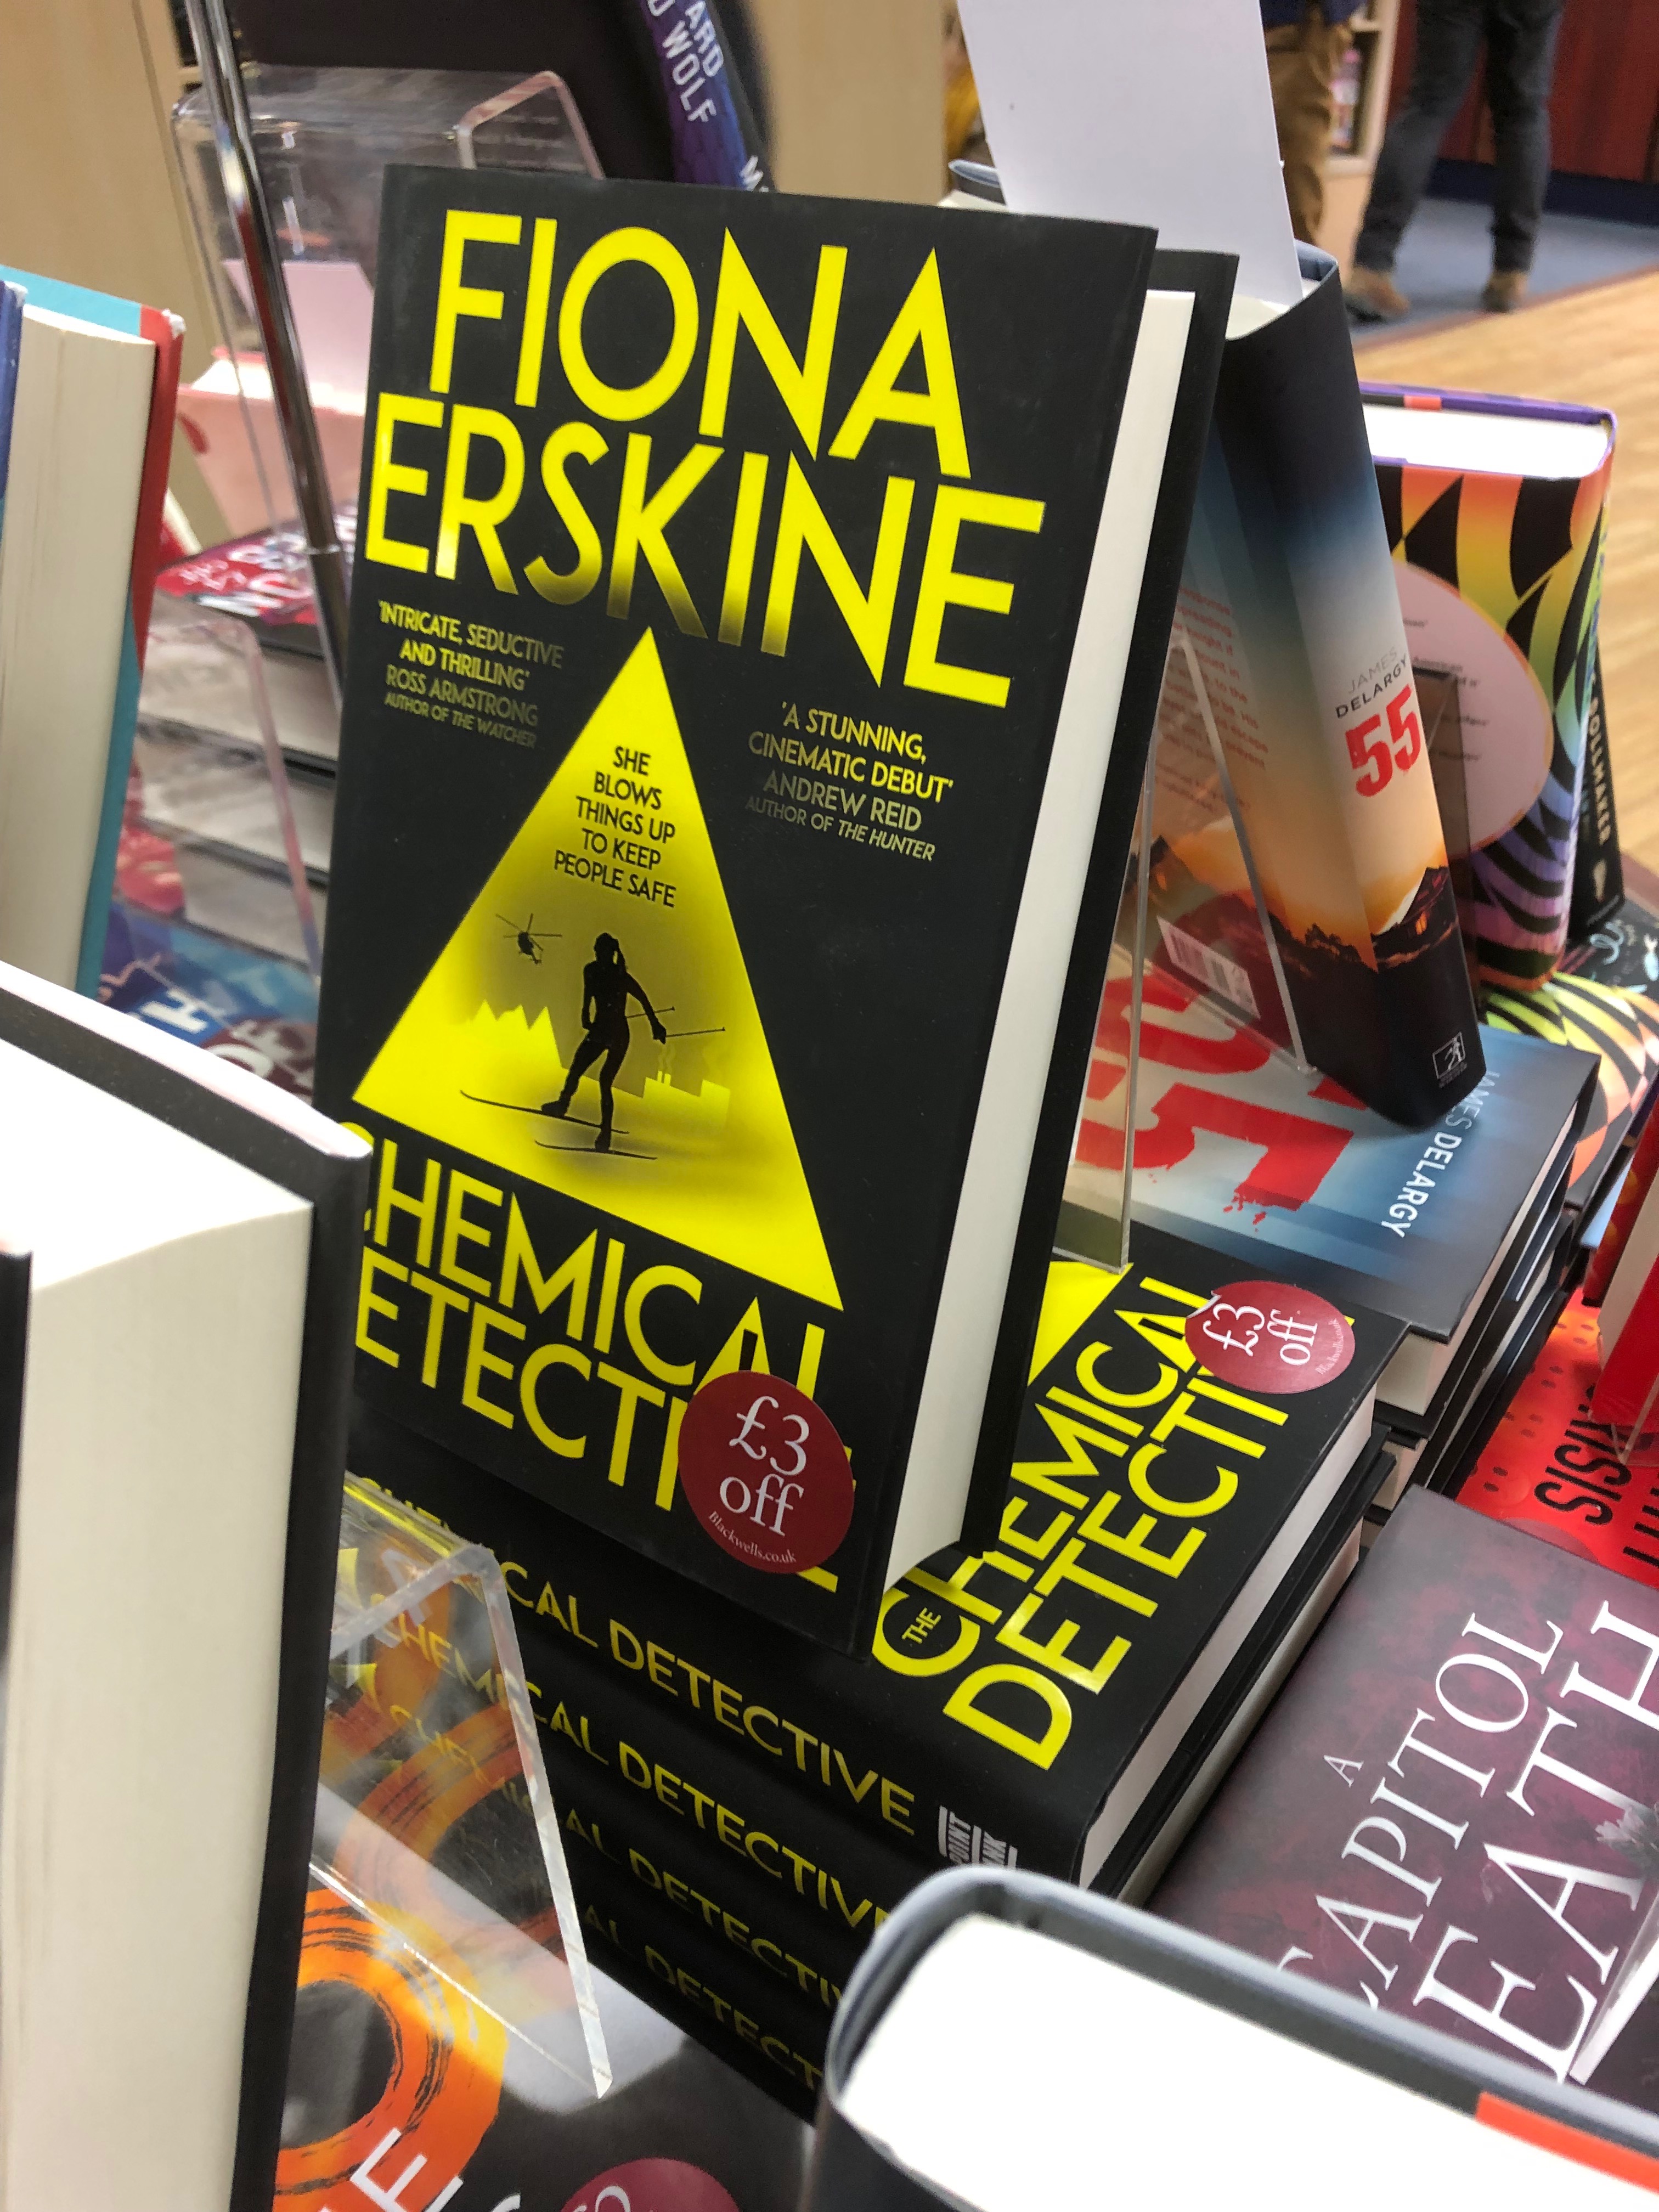 The Chemical Detective now available in Heffers.